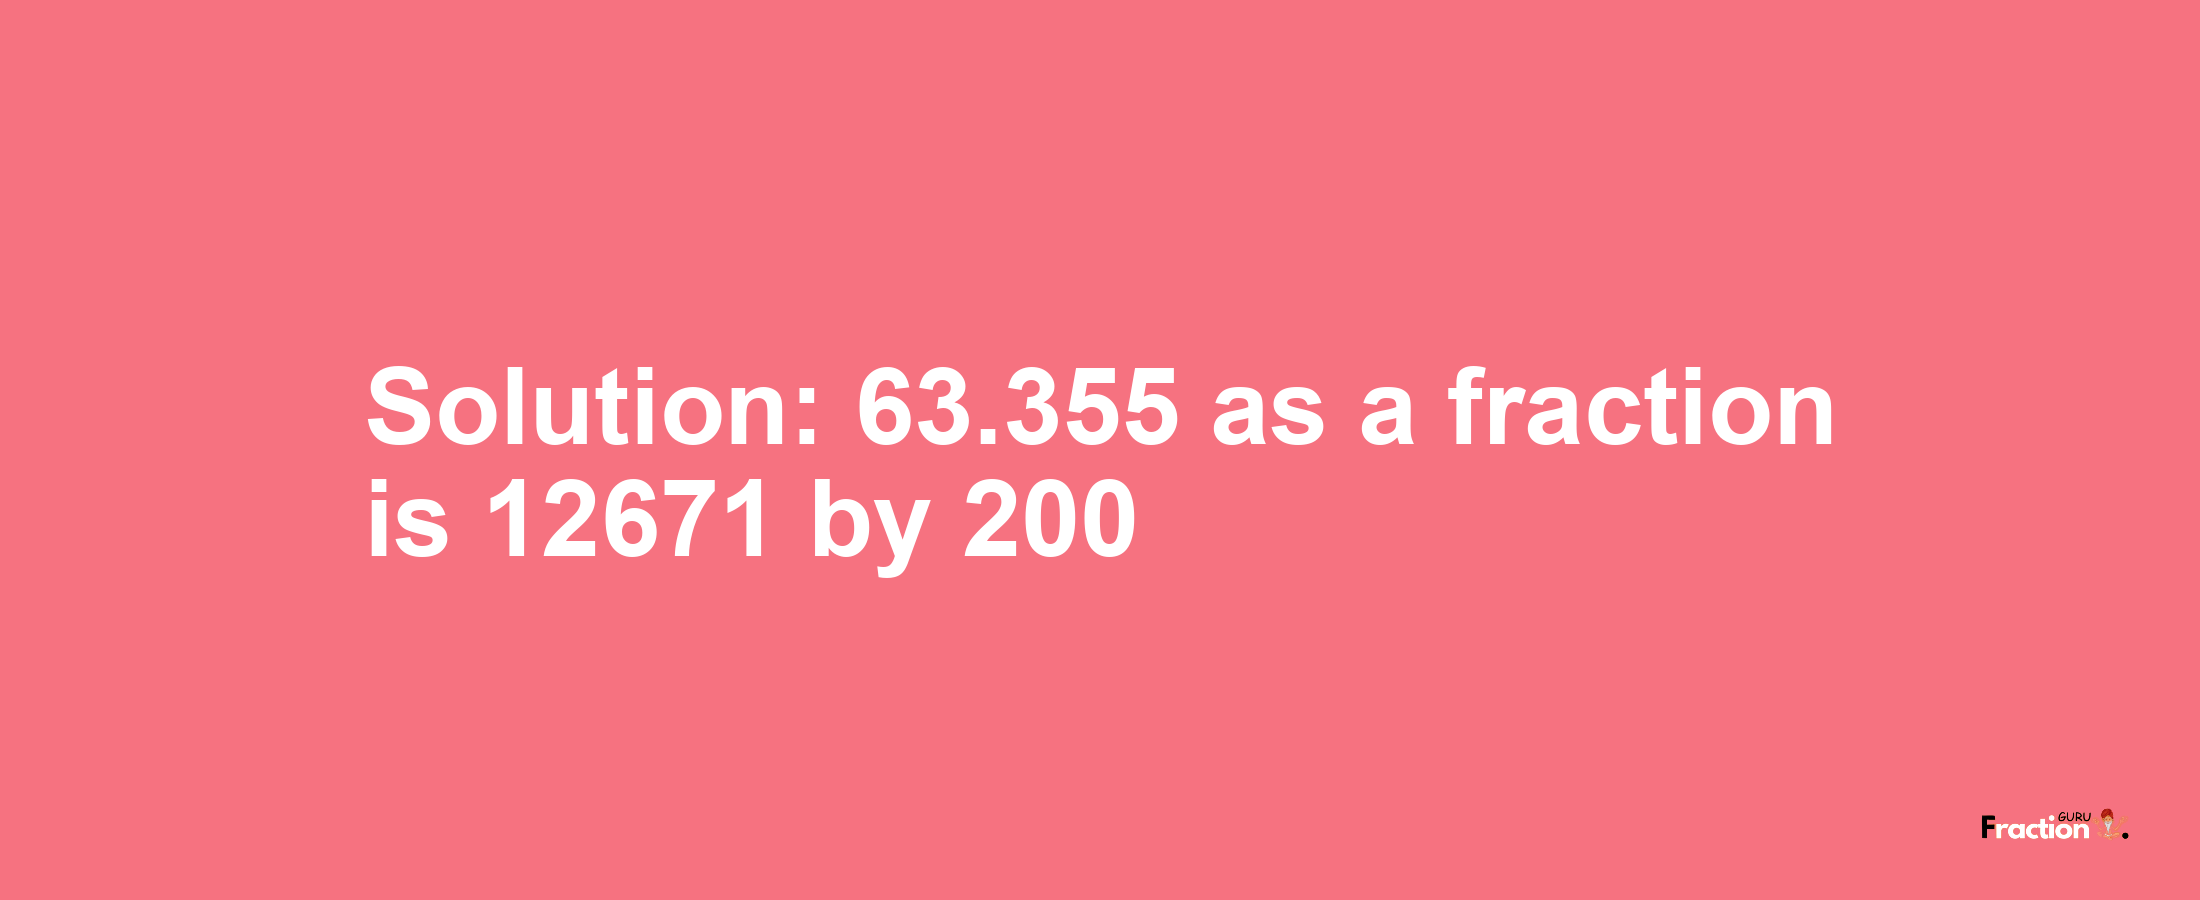 Solution:63.355 as a fraction is 12671/200